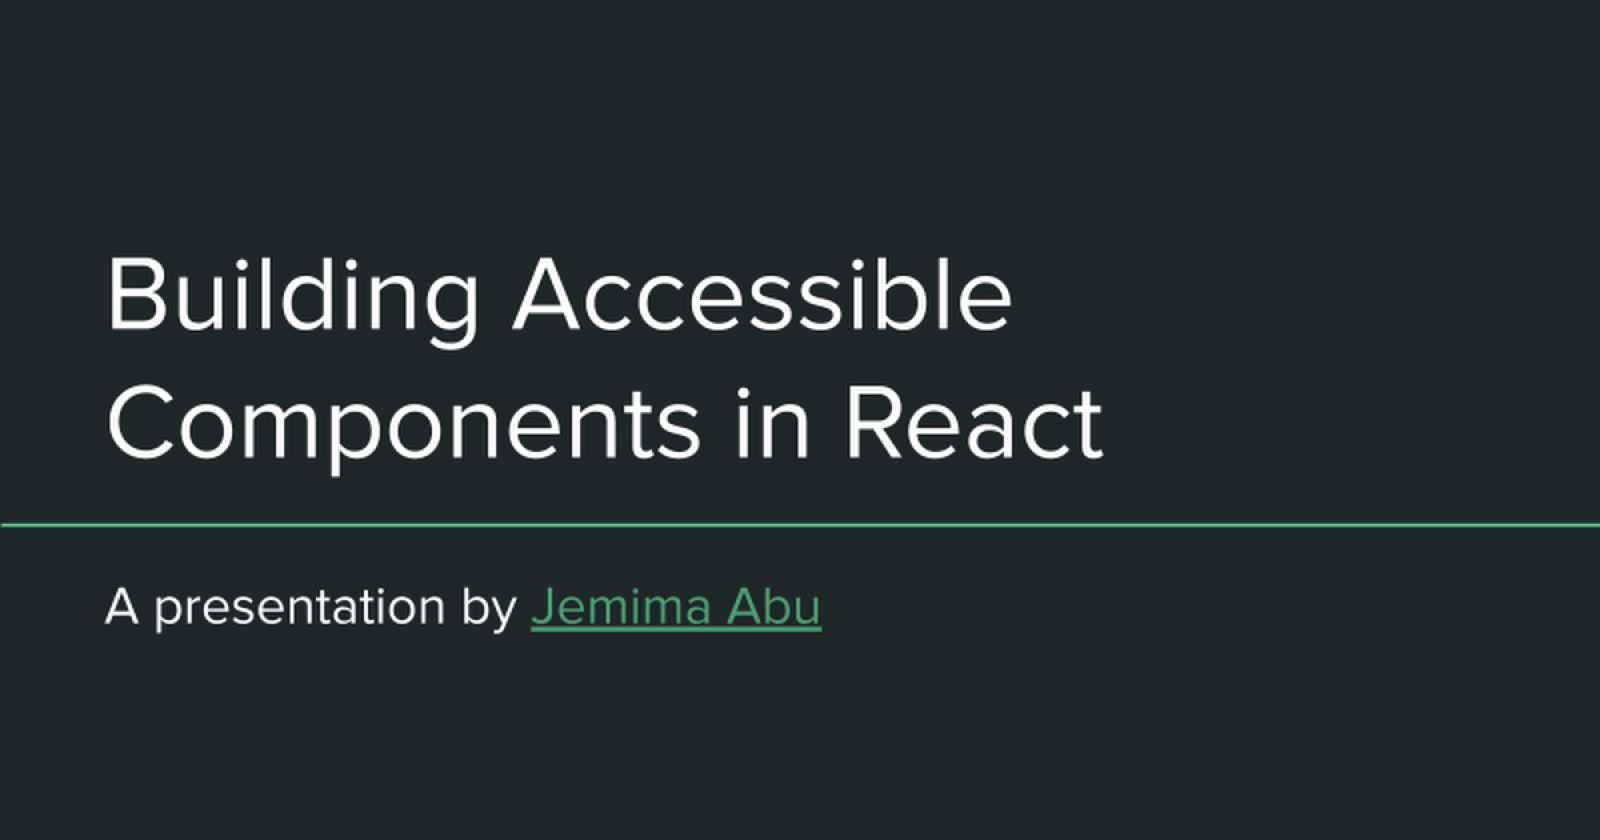 Building Accessible Components in React